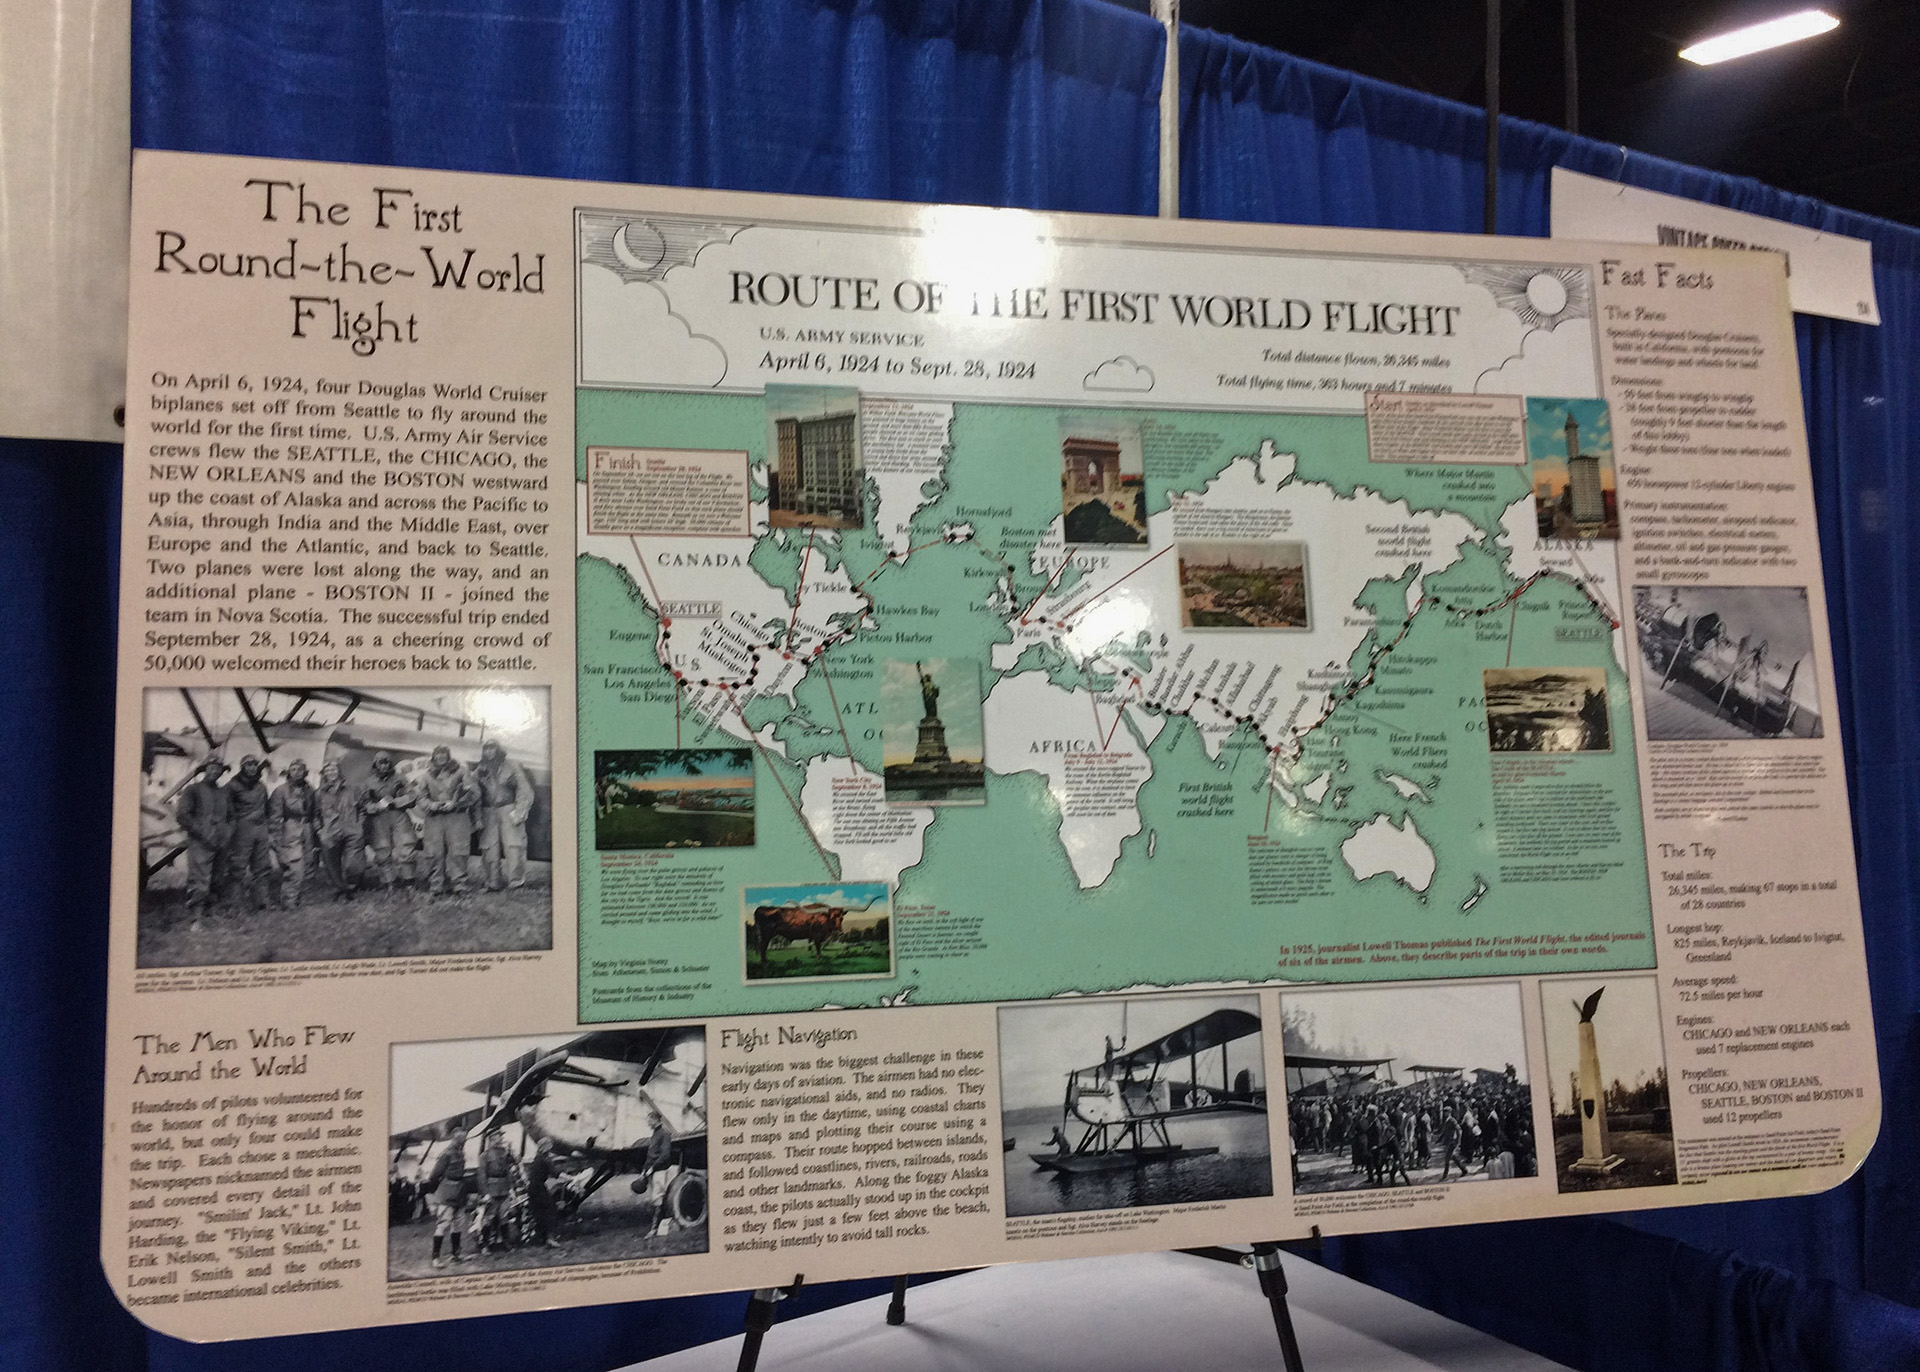 Display of the route and scenes of the 1924 flight.